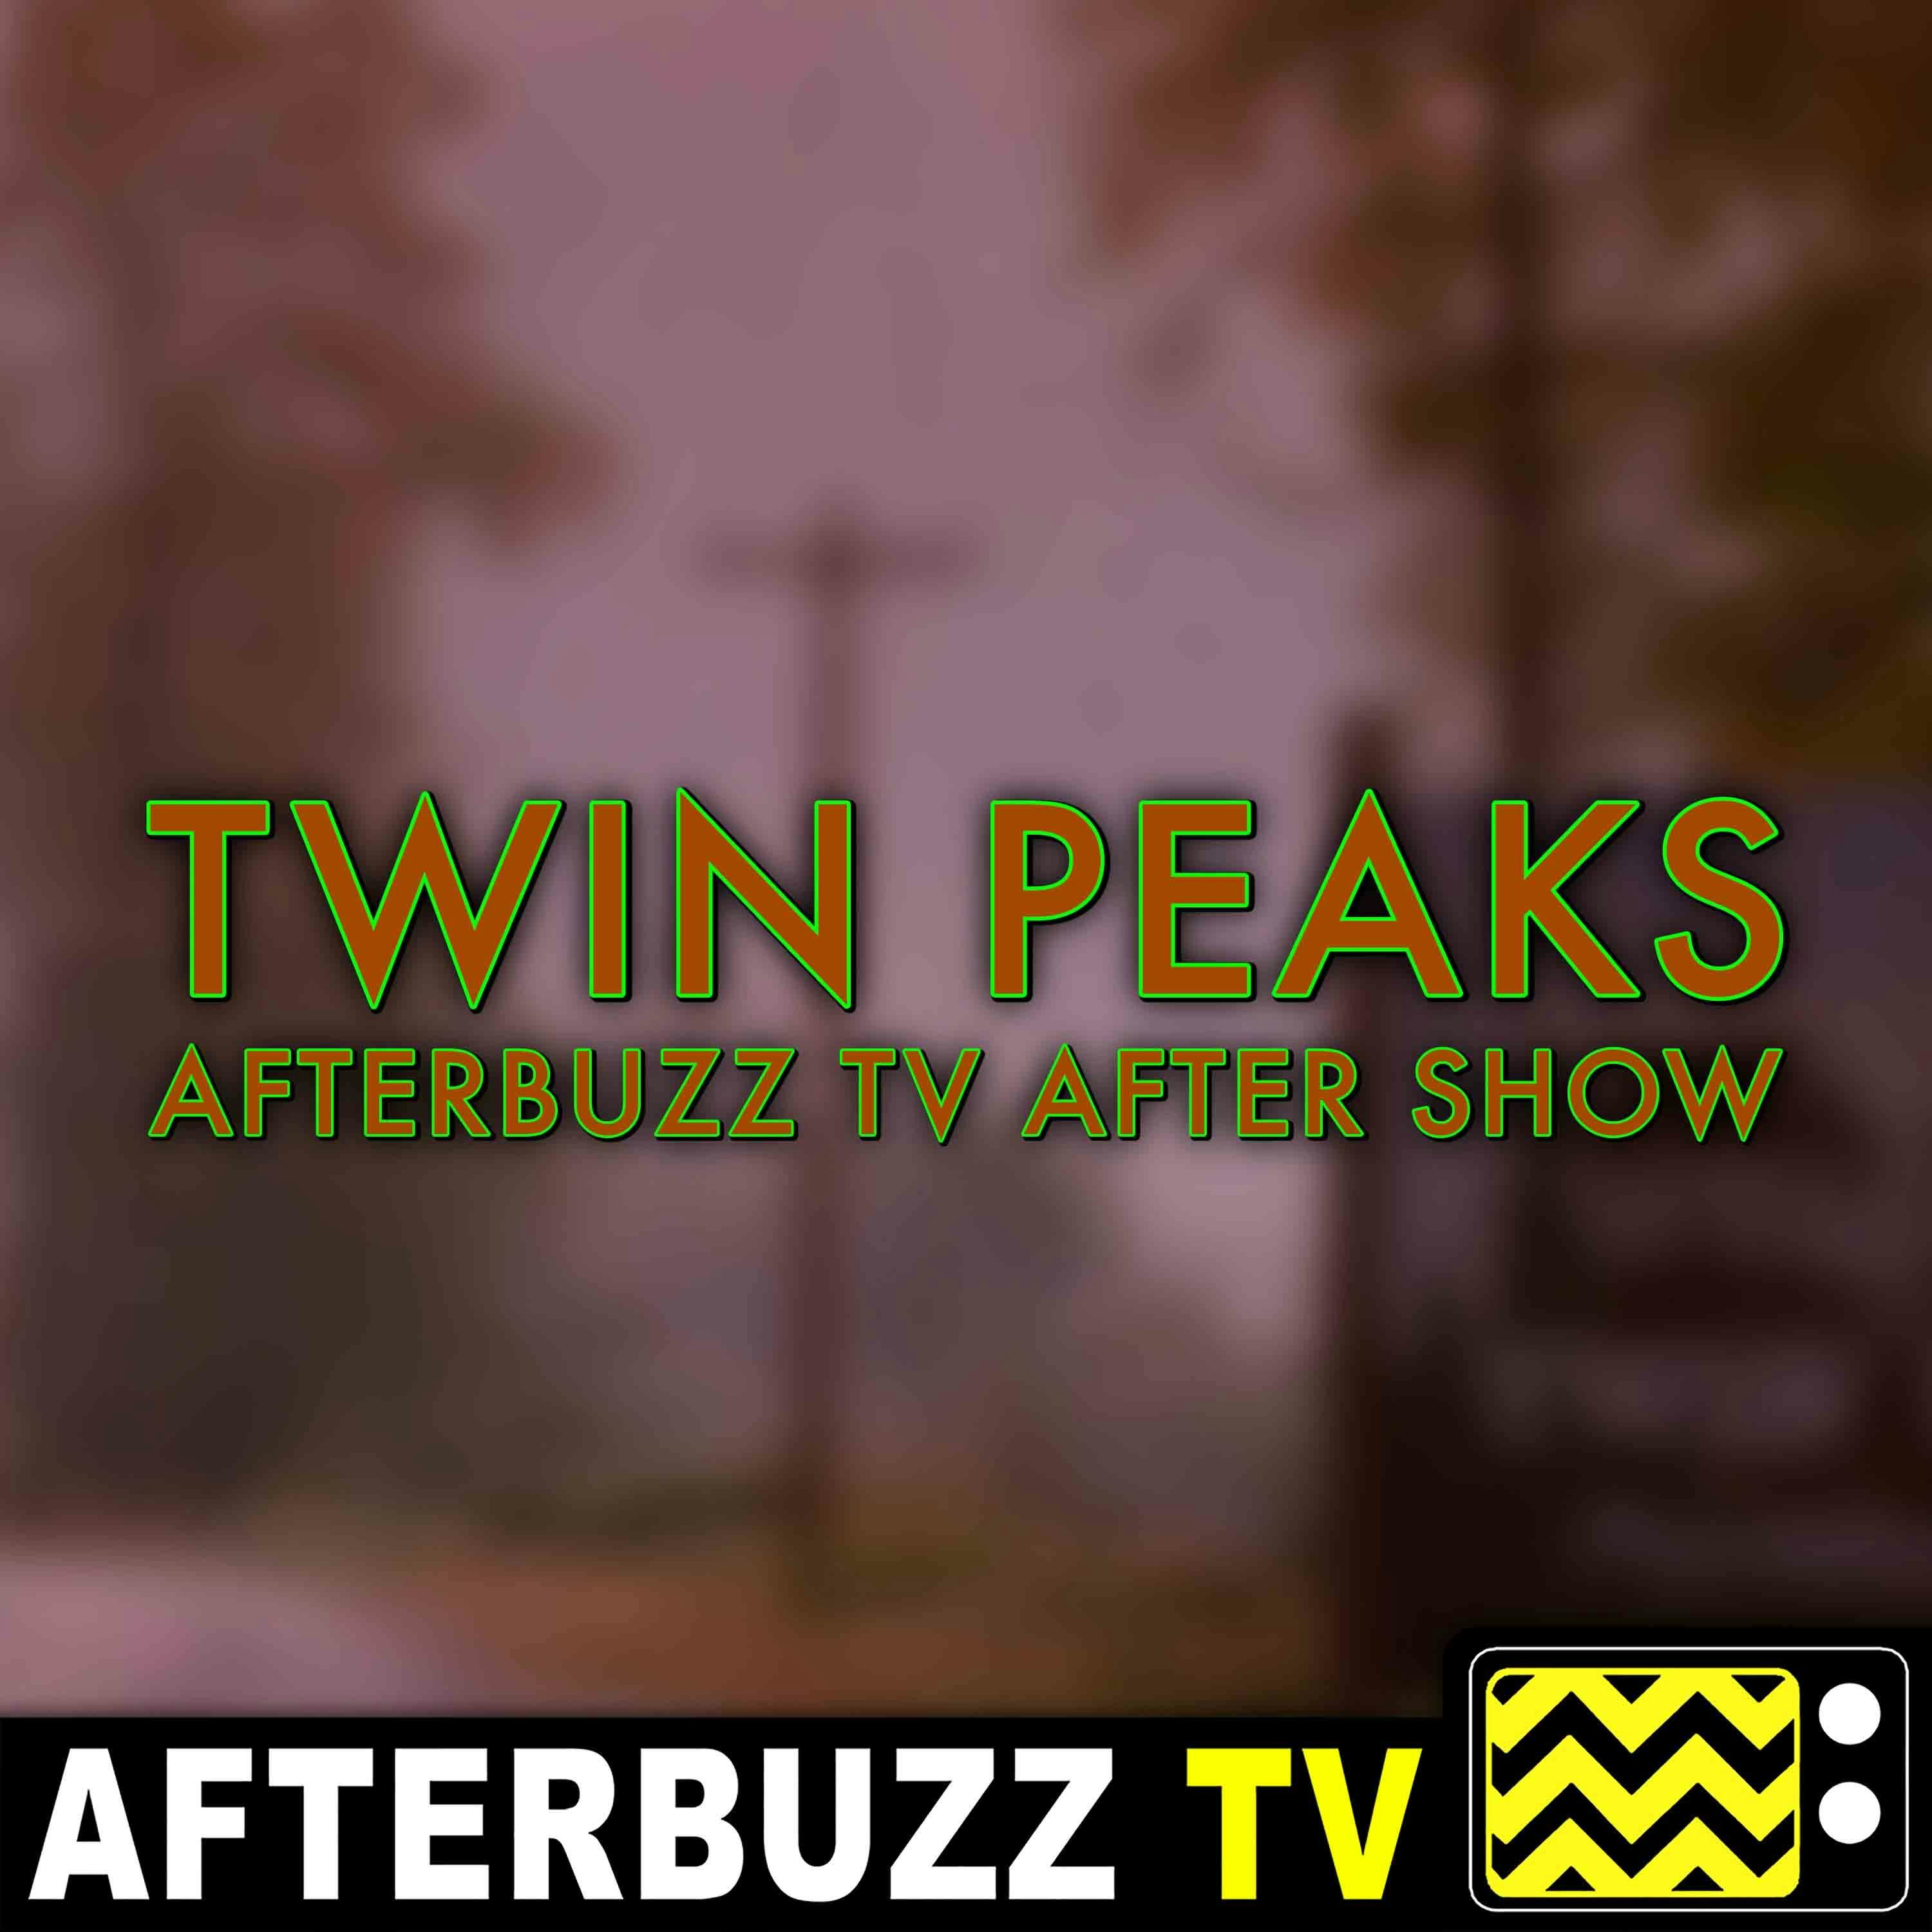 Twin Peaks S:1 | The Return: Part 15 E:15 | AfterBuzz TV AfterShow